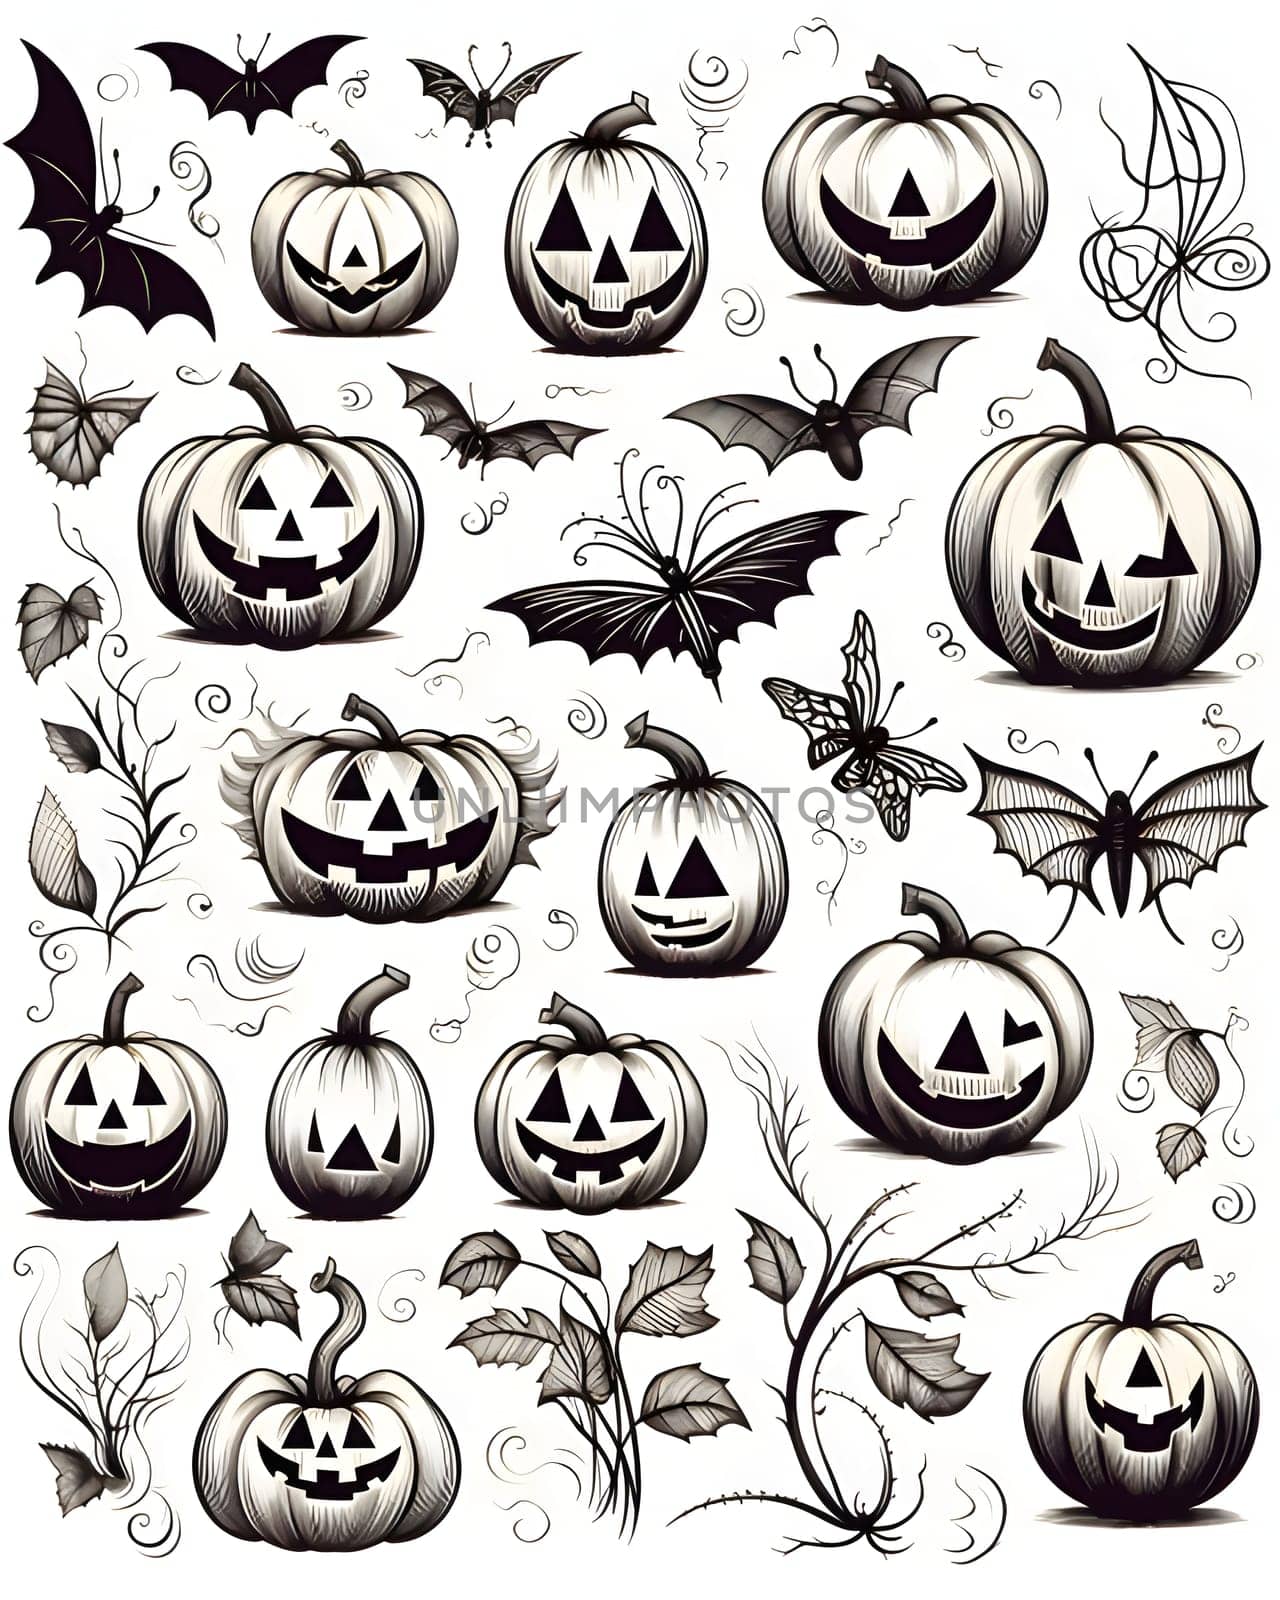 Elegant and modern. Black and white jack-o-lantern pumpkins and bats as abstract background, wallpaper, banner, texture design with pattern - vector.